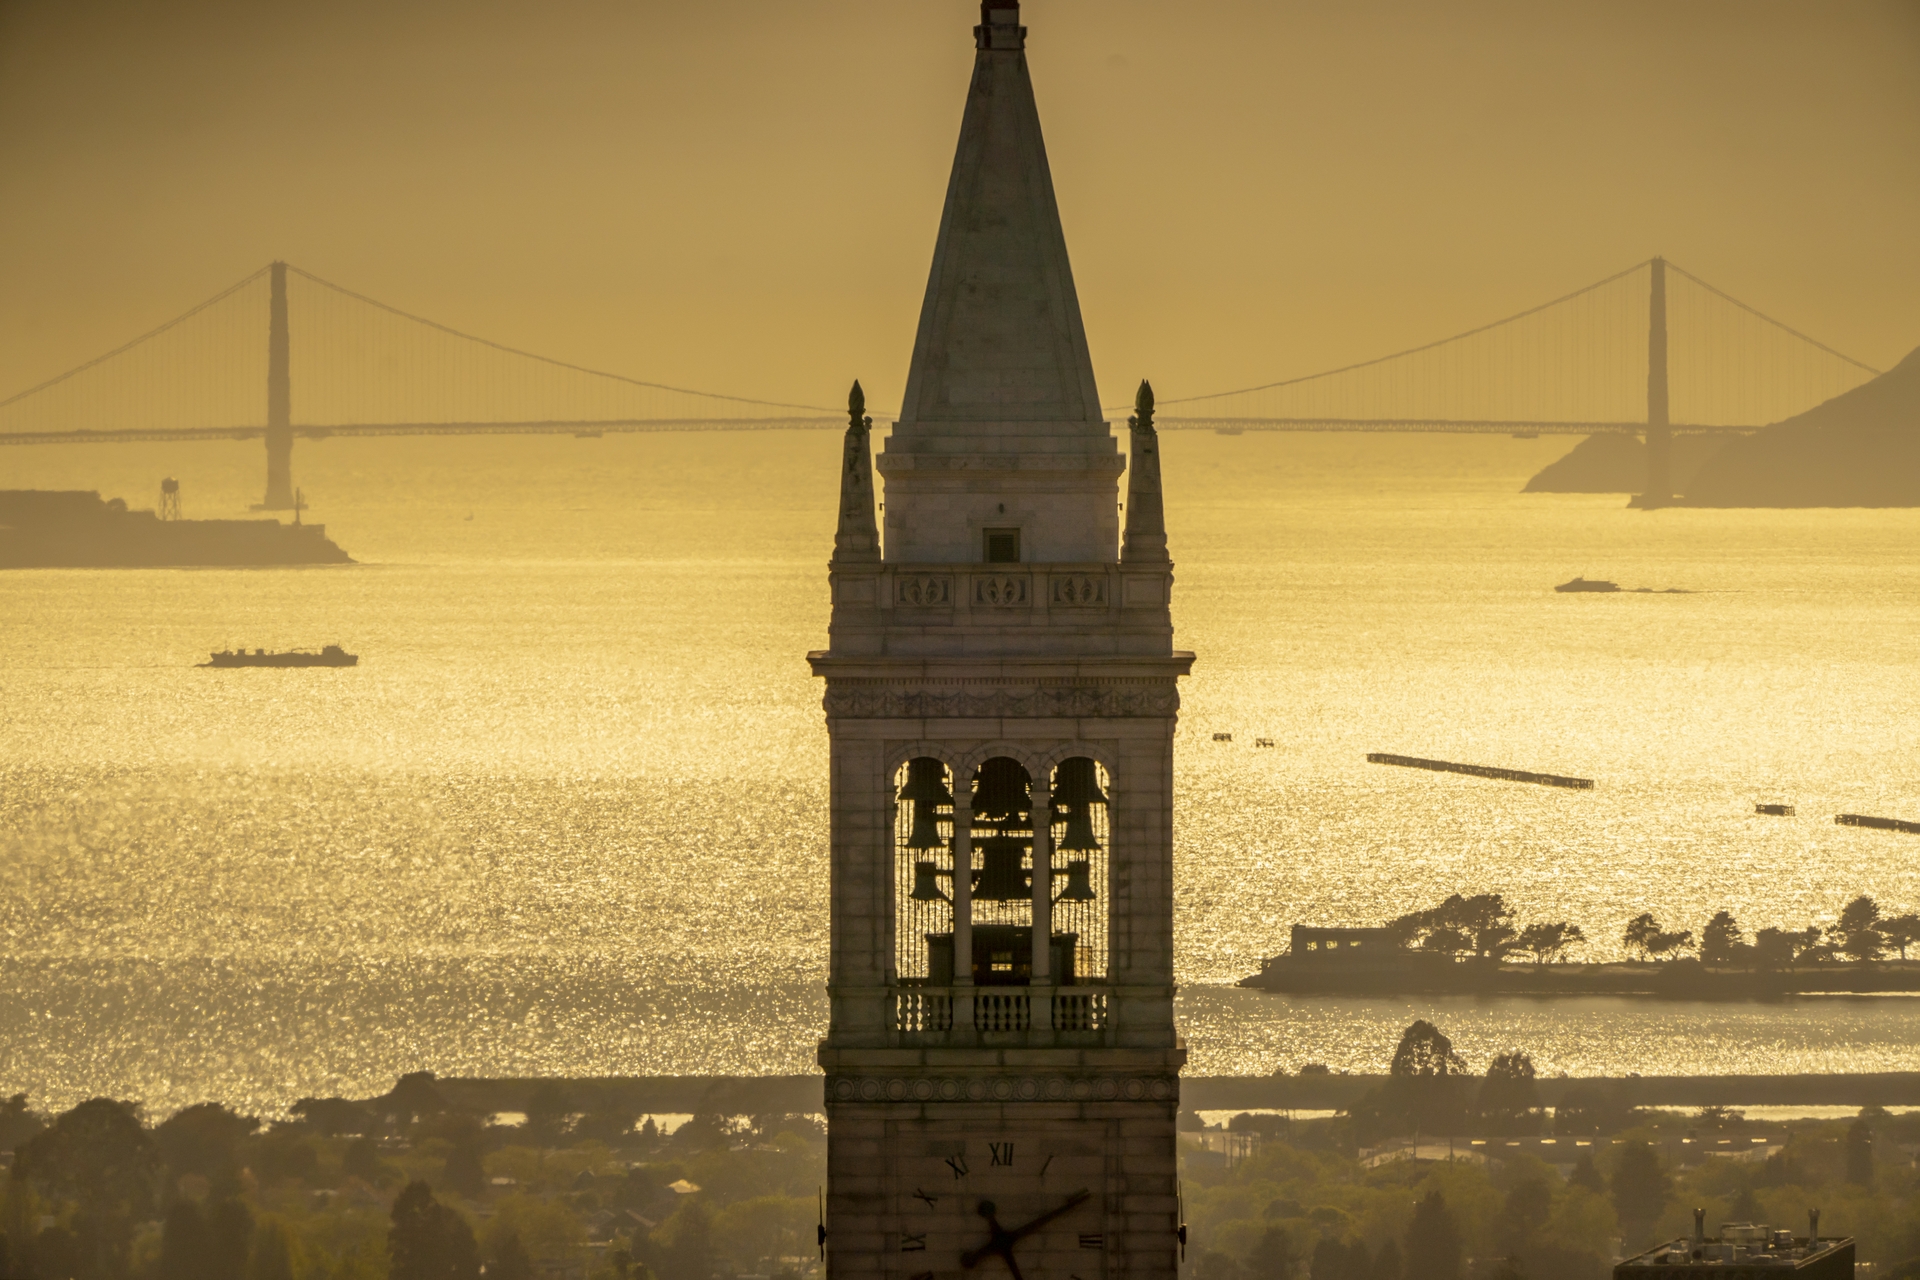 A view of San Francisco Bay from the Berkeley hills. The top of the Campanile is front and center, with shimmering water and the Golden Gate Bridge beyond. The entire photo is cast in a golden light.